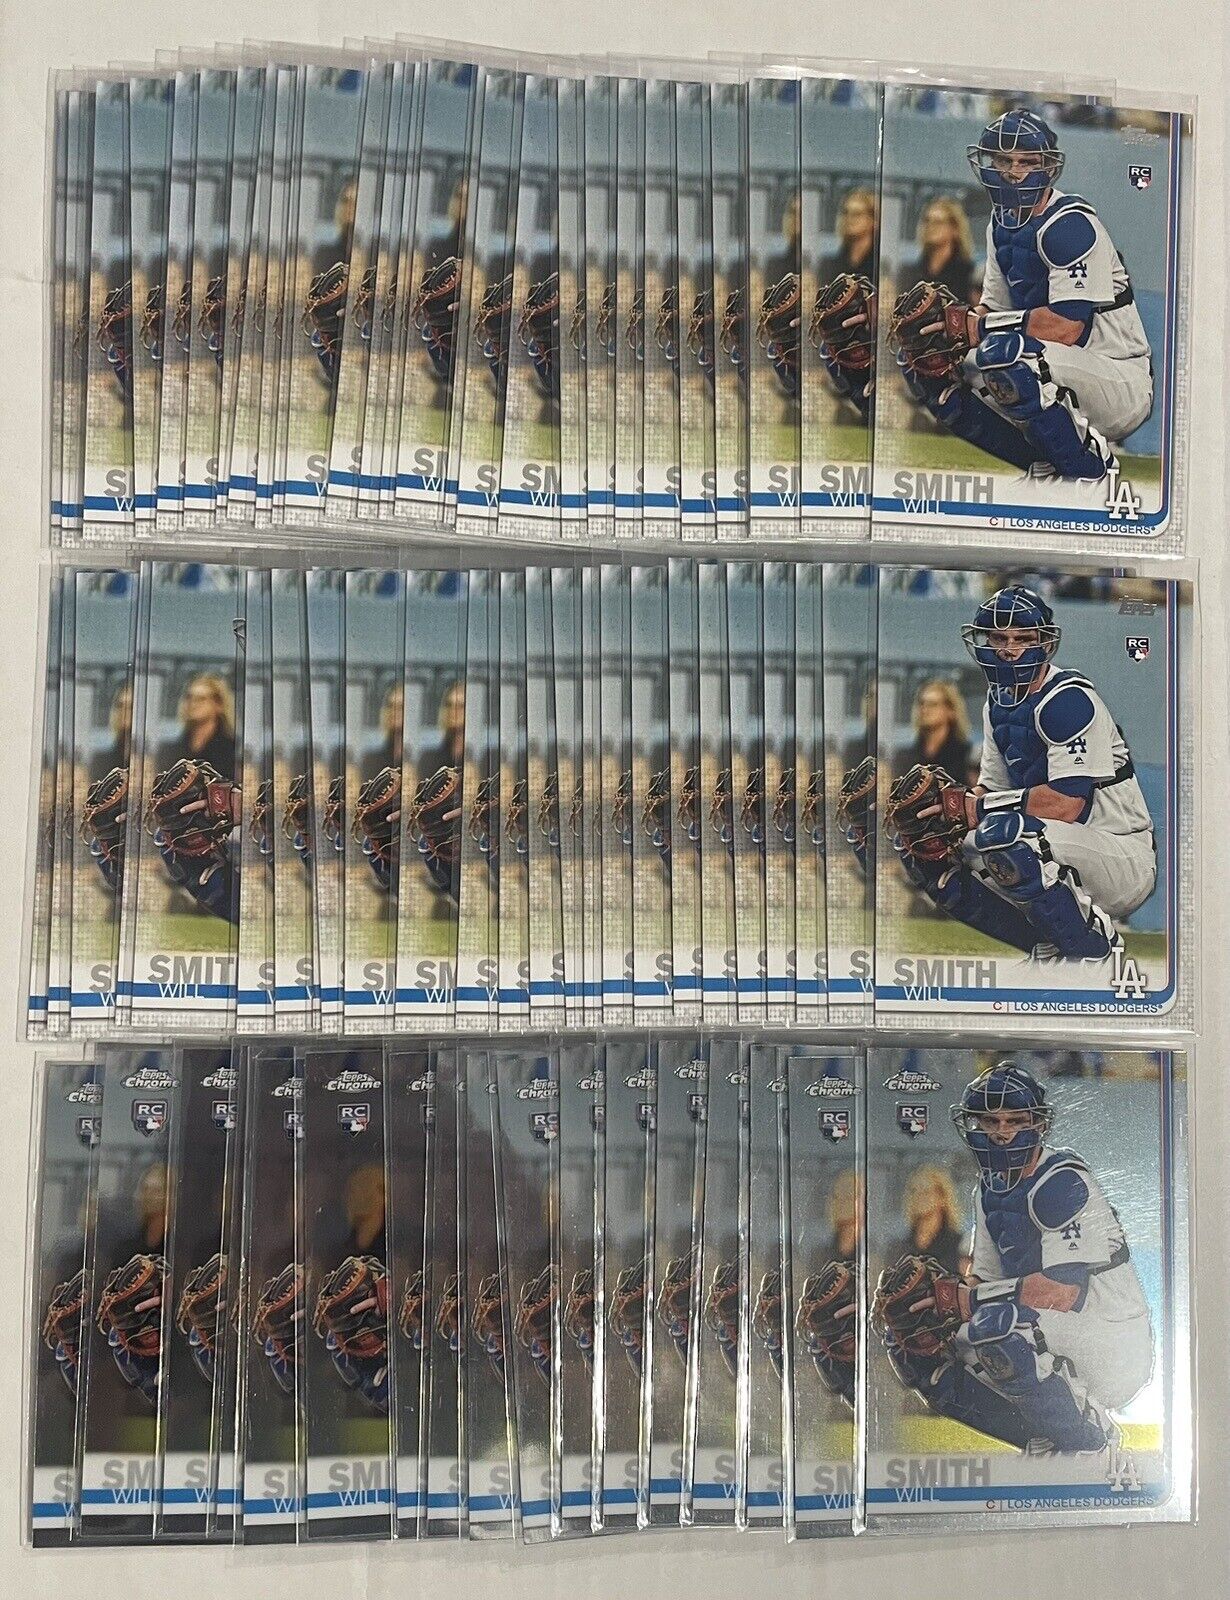 2019 Topps Update / Chrome LOT OF 70 Will Smith RC Rookie 53 Paper + 17 Chrome